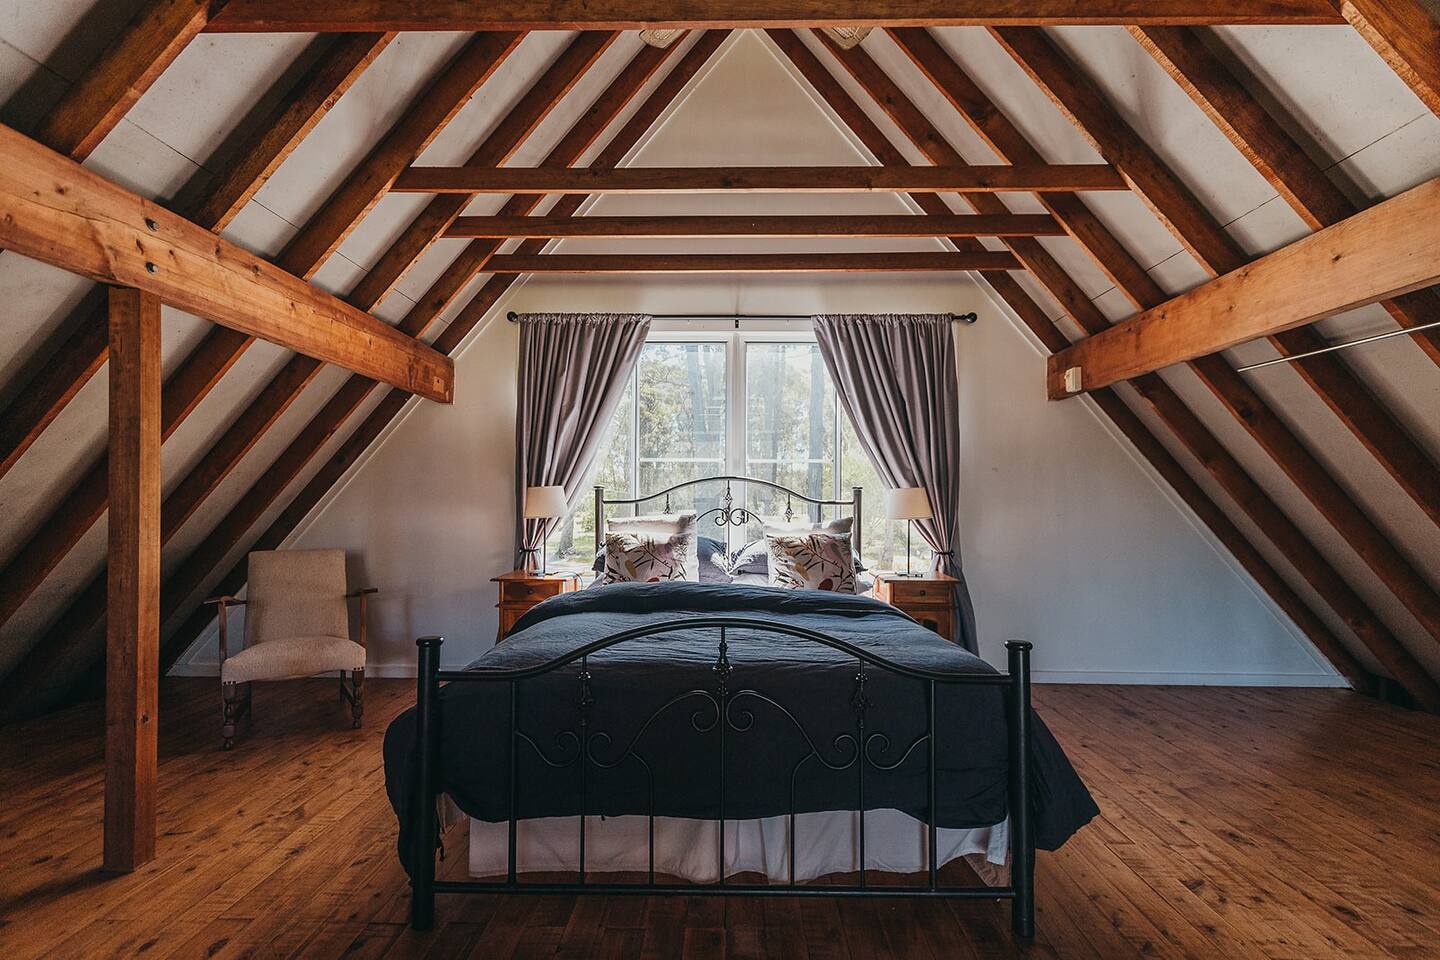 Attic wooden house with beams